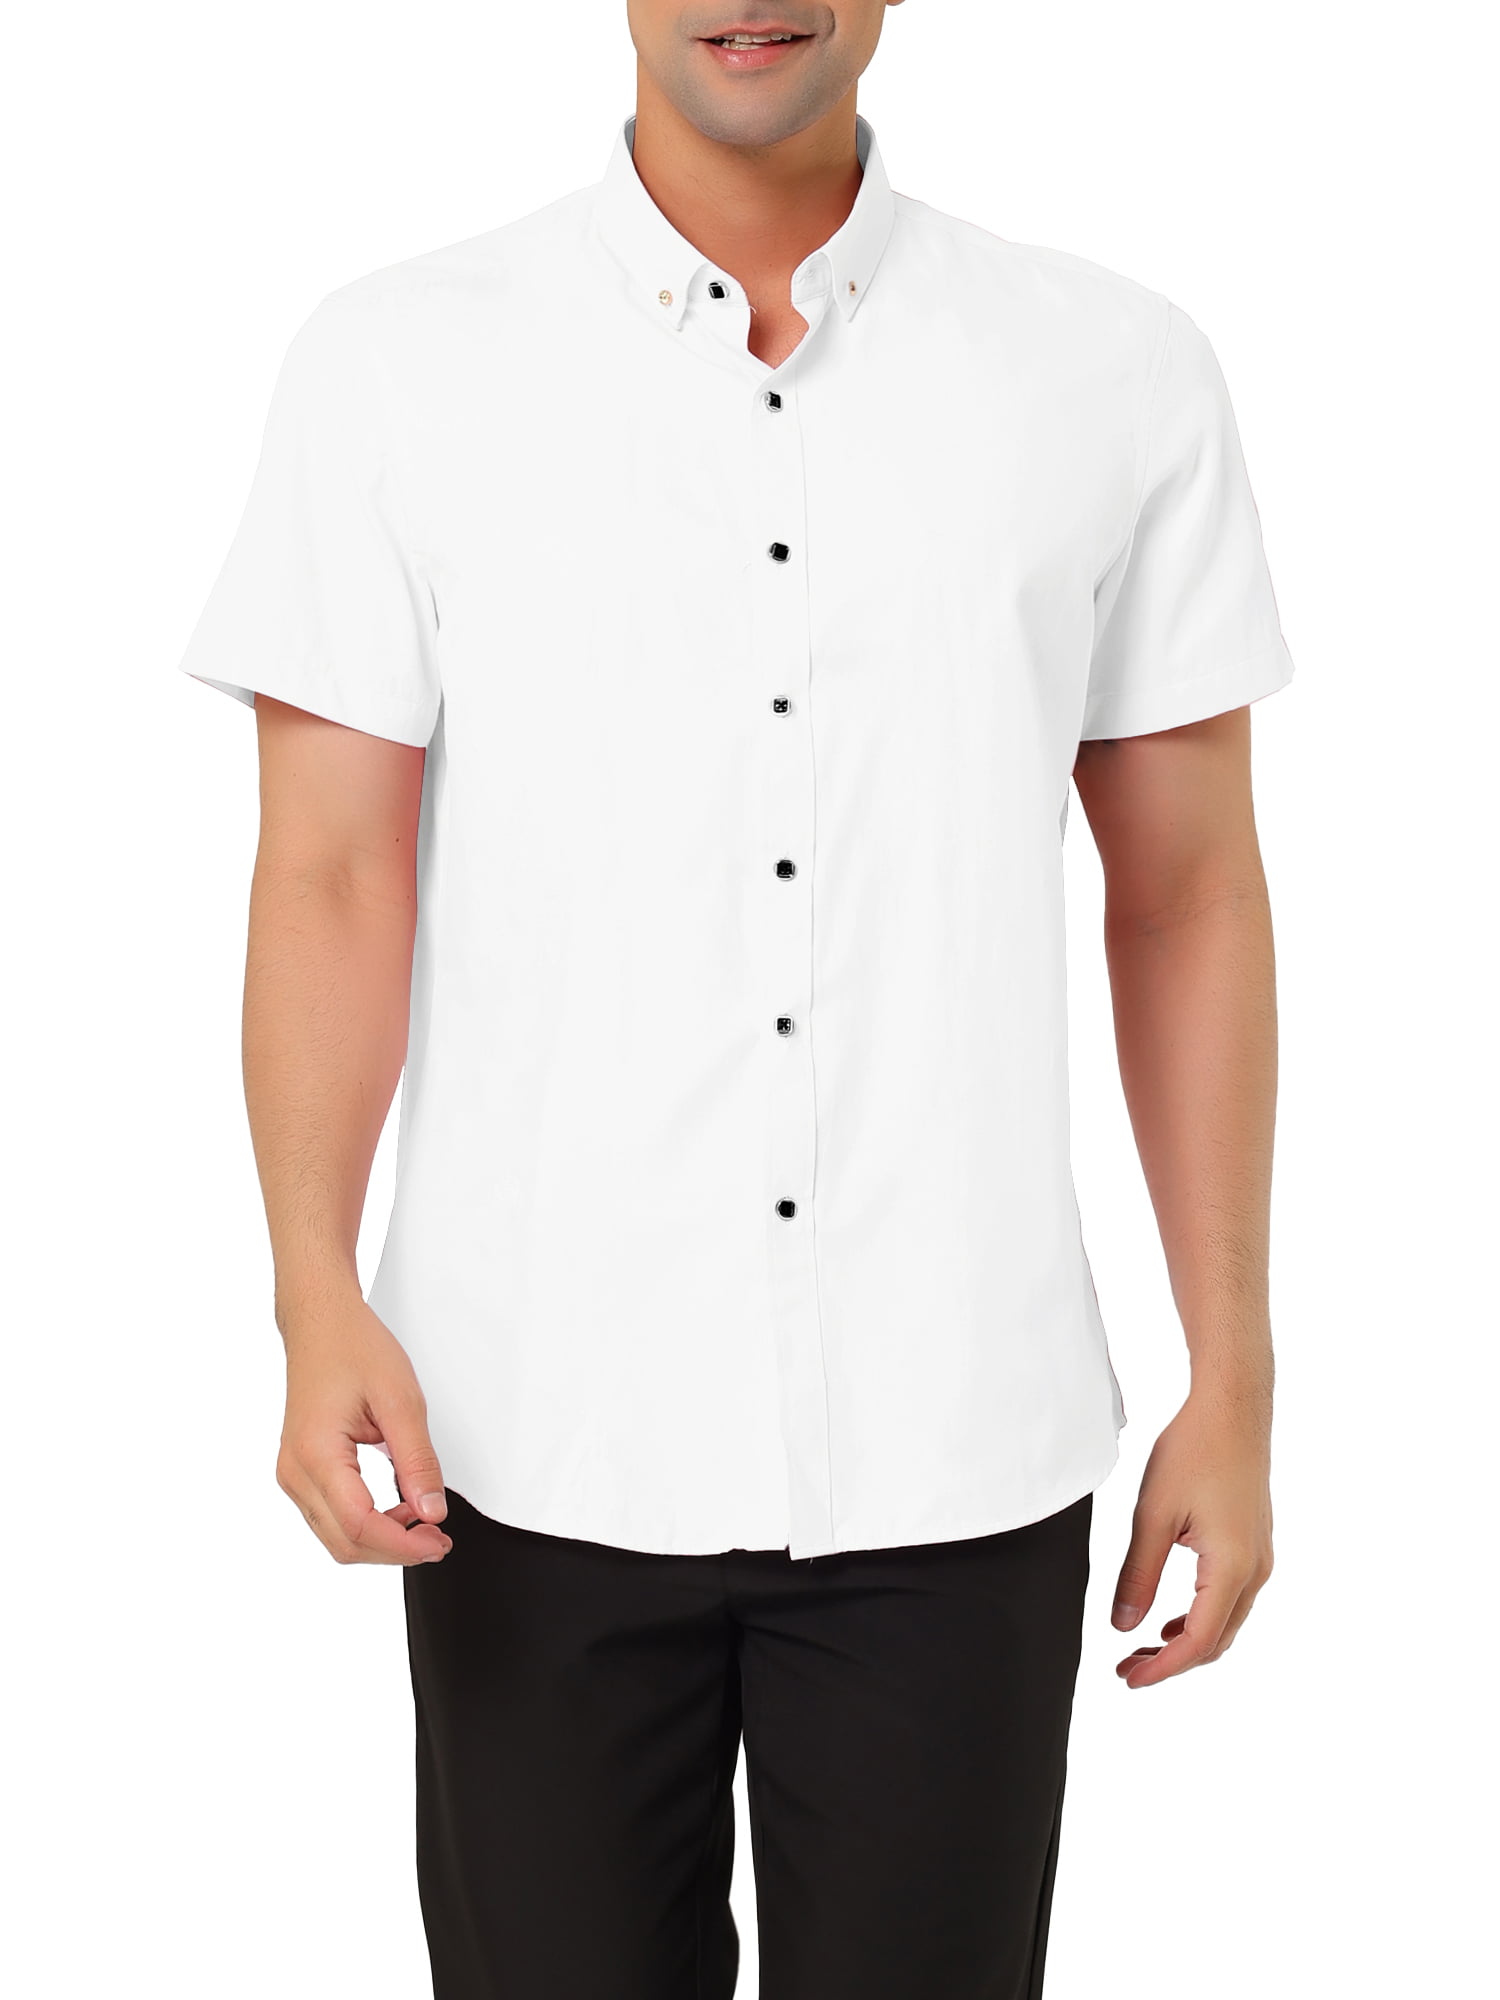 YYear Mens Casual Easy-Care Short Sleeve Button Up Oversized Dress Shirts 